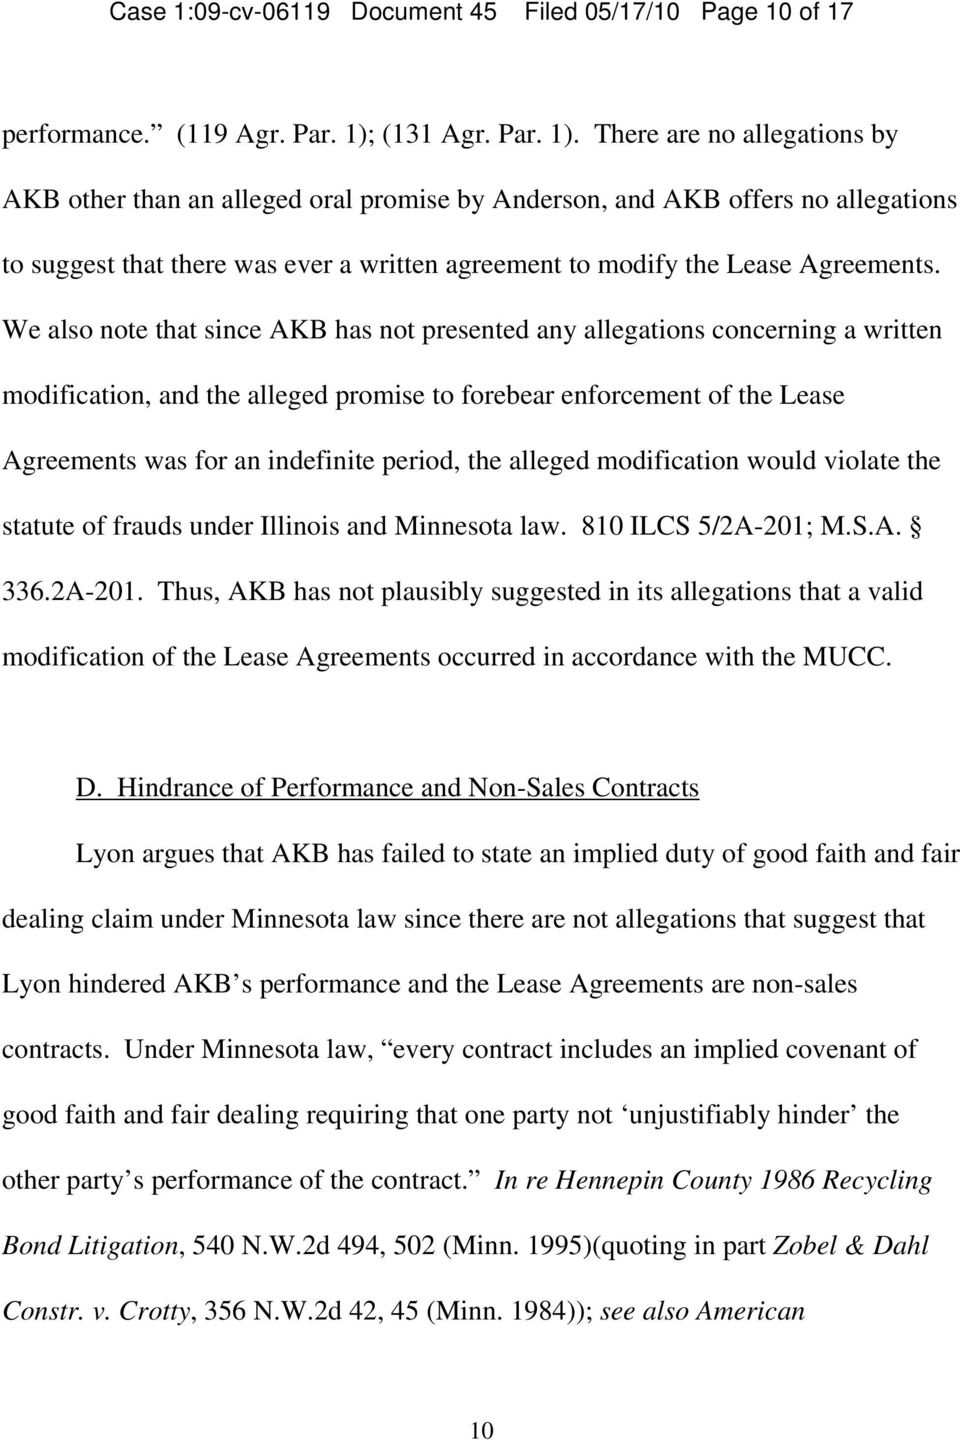 There are no allegations by AKB other than an alleged oral promise by Anderson, and AKB offers no allegations to suggest that there was ever a written agreement to modify the Lease Agreements.